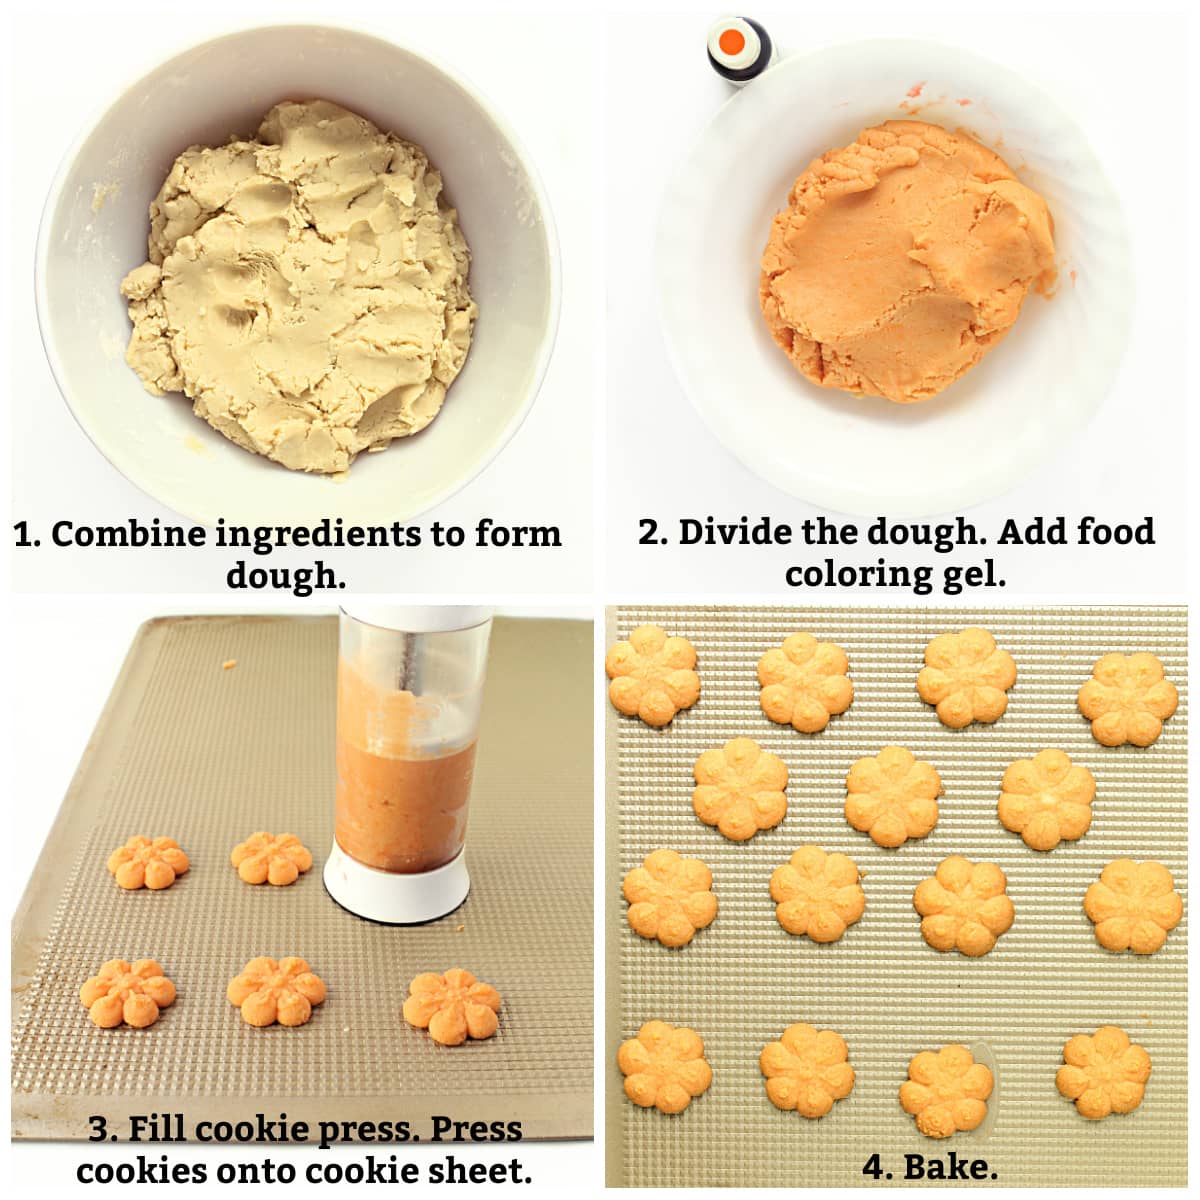 Instructions: combine ingredients to form dough, color dough, fill cookie press, press cookies, bake.